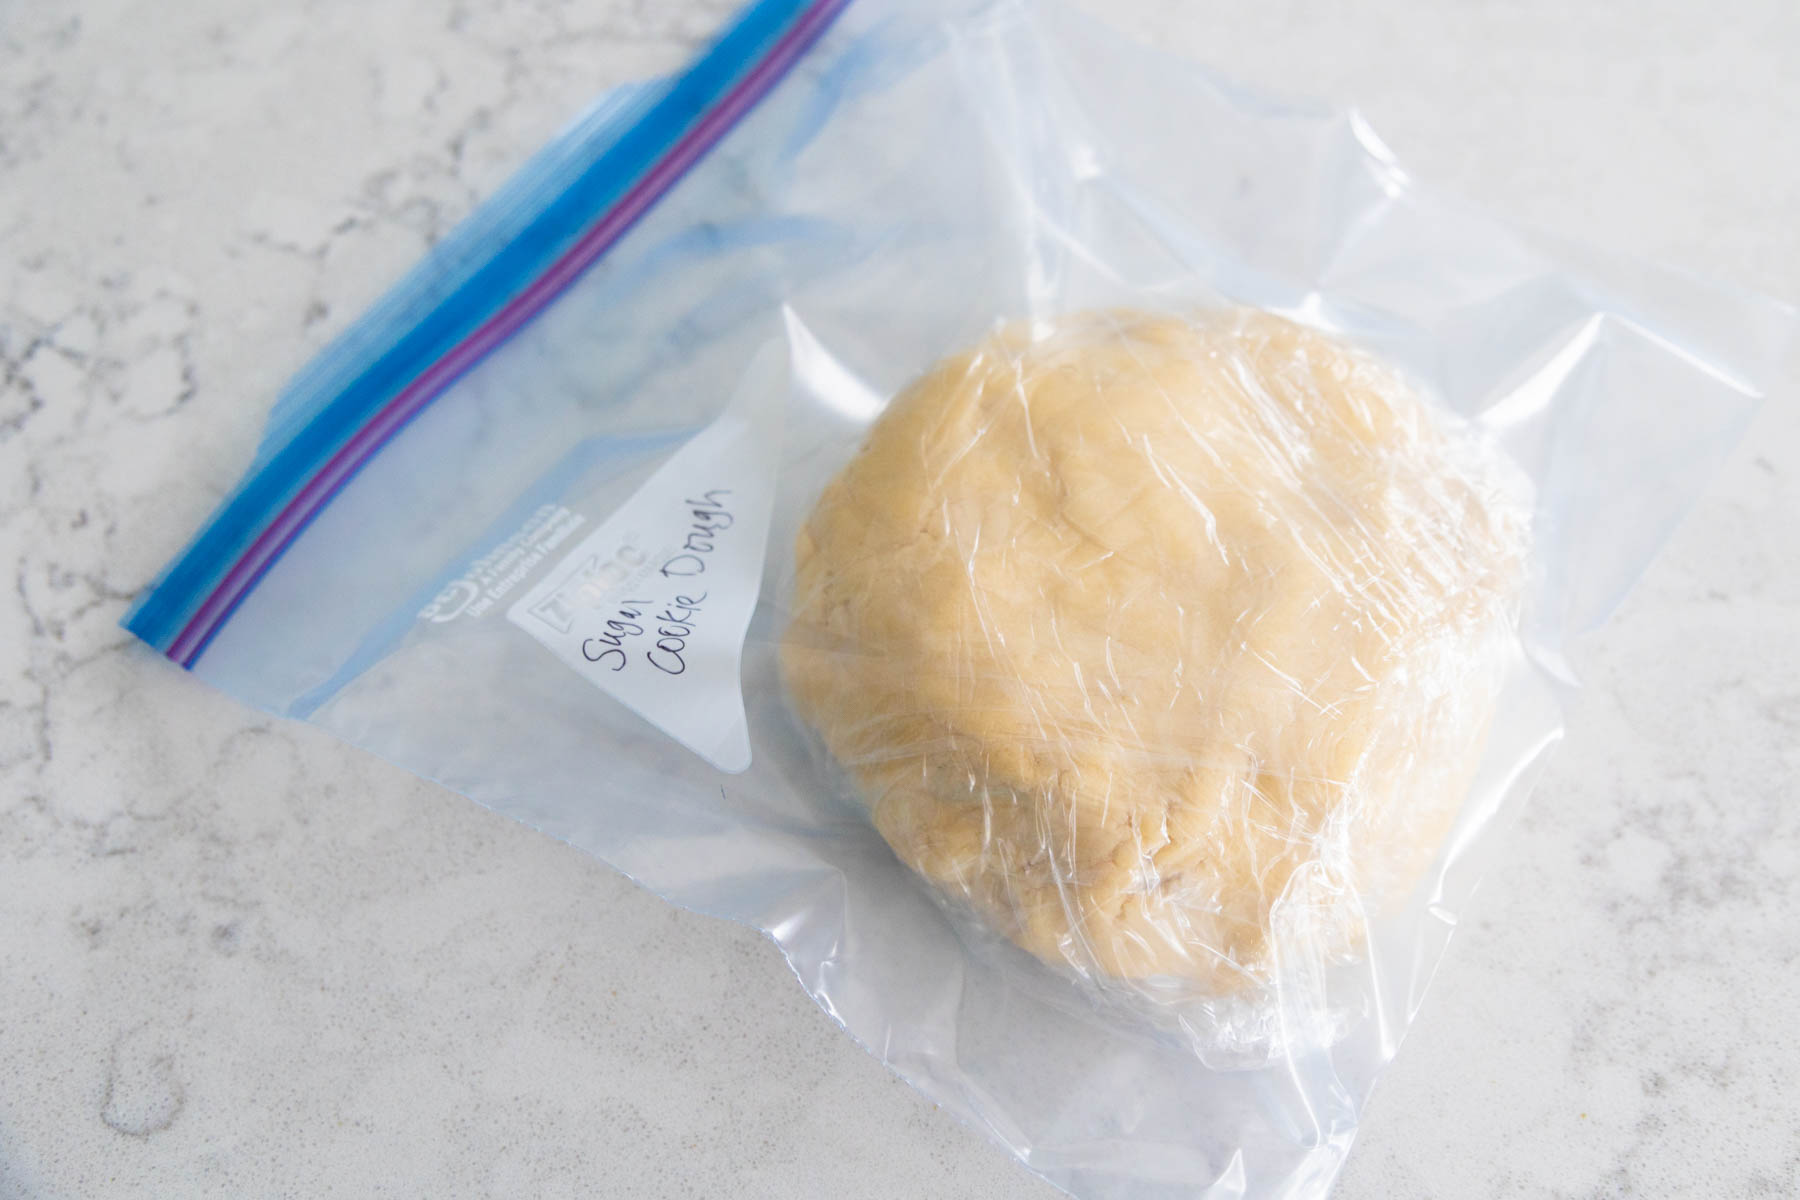 The sugar cookie dough has been sealed in a plastic bag for the freezer.